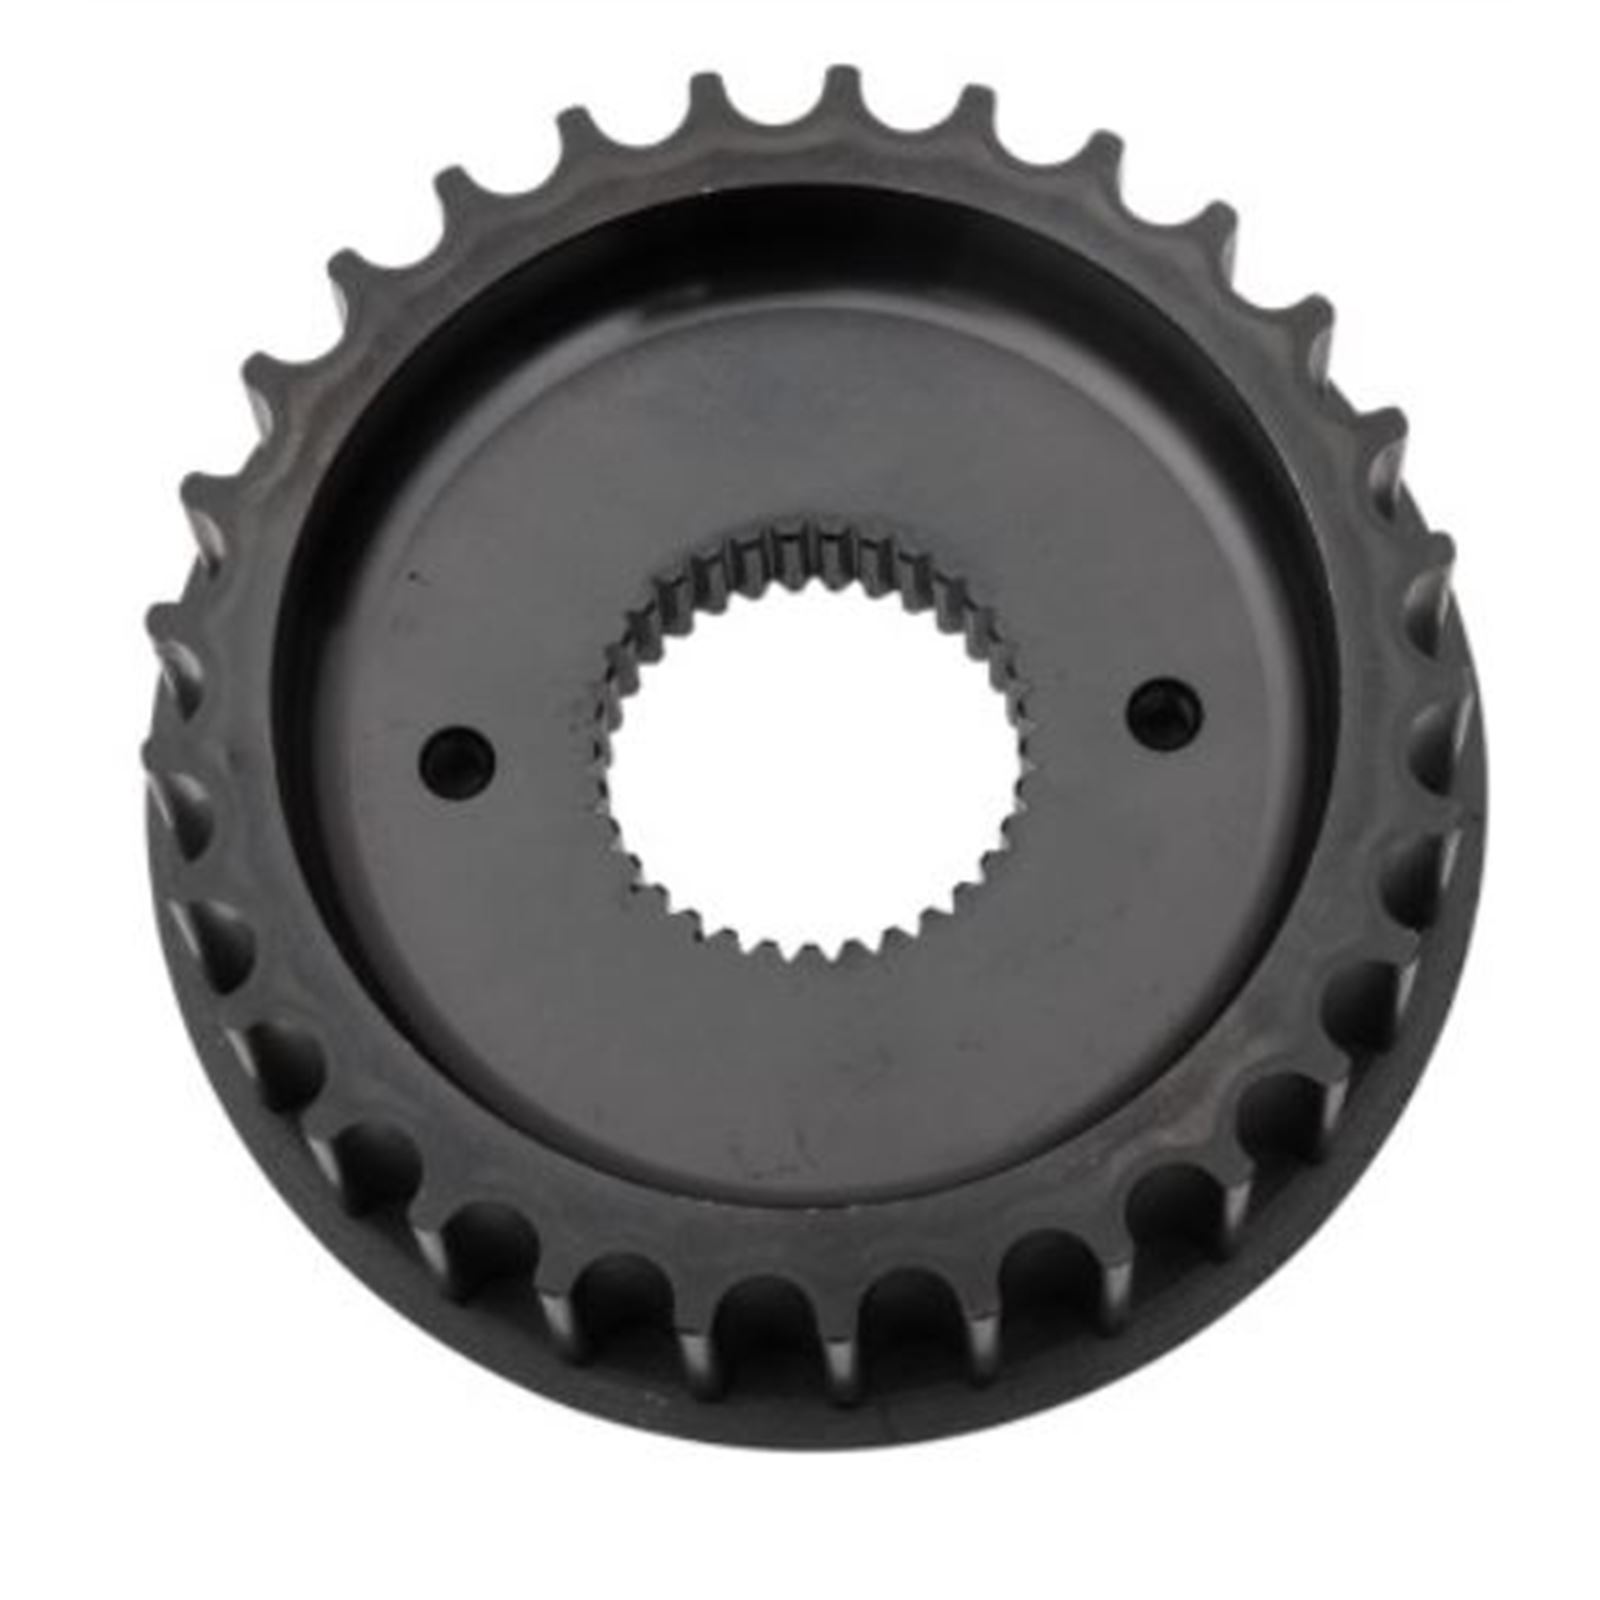 Drag Specialties Transmission Pulley - 29-Tooth